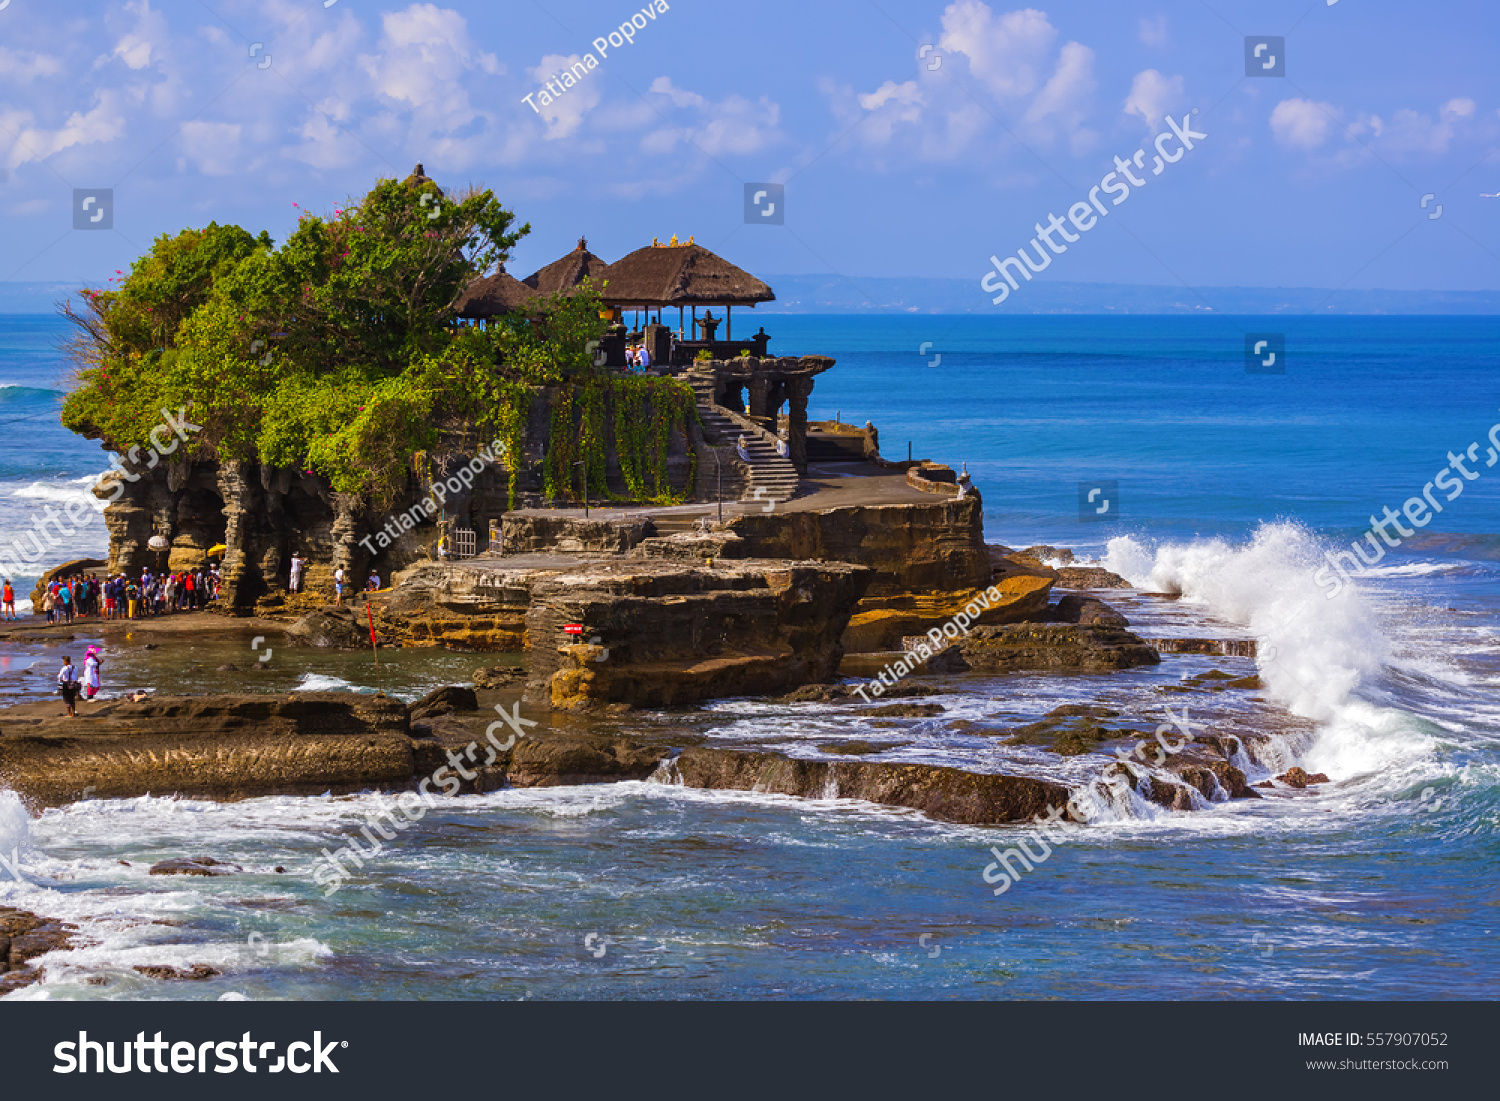 Tanah Lot Temple in Bali Indonesia - nature and architecture background #557907052